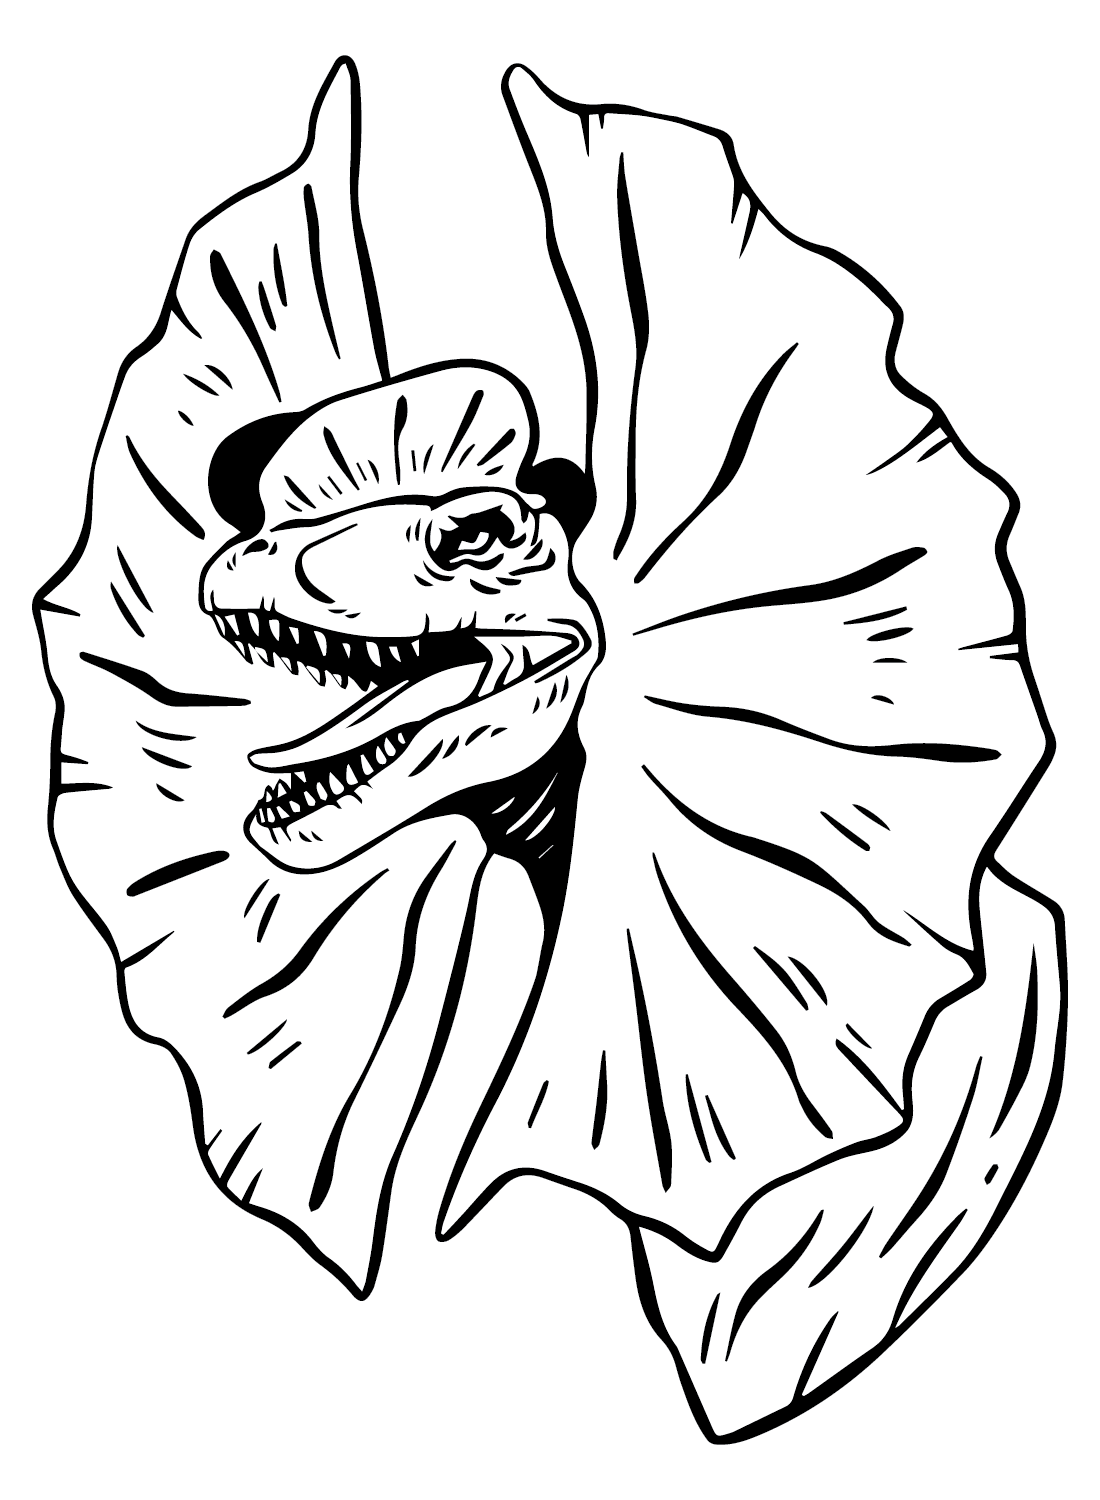 Dilophosaurus Coloring Pages to for Kids from Dilophosaurus